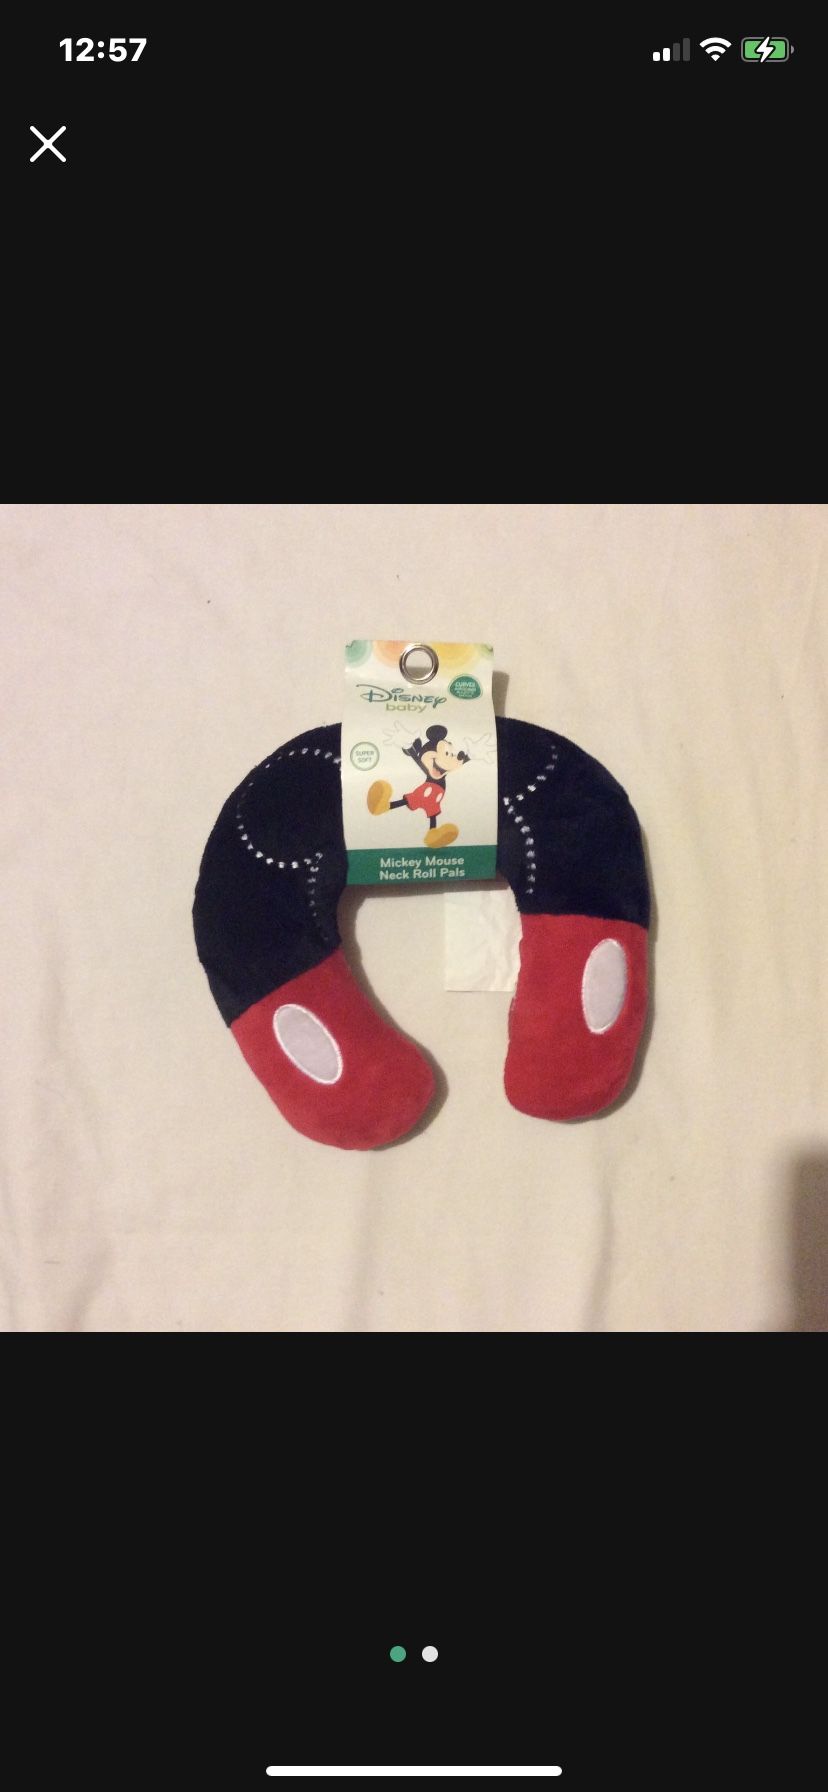 Mickey Mouse Neck Roll Pillow